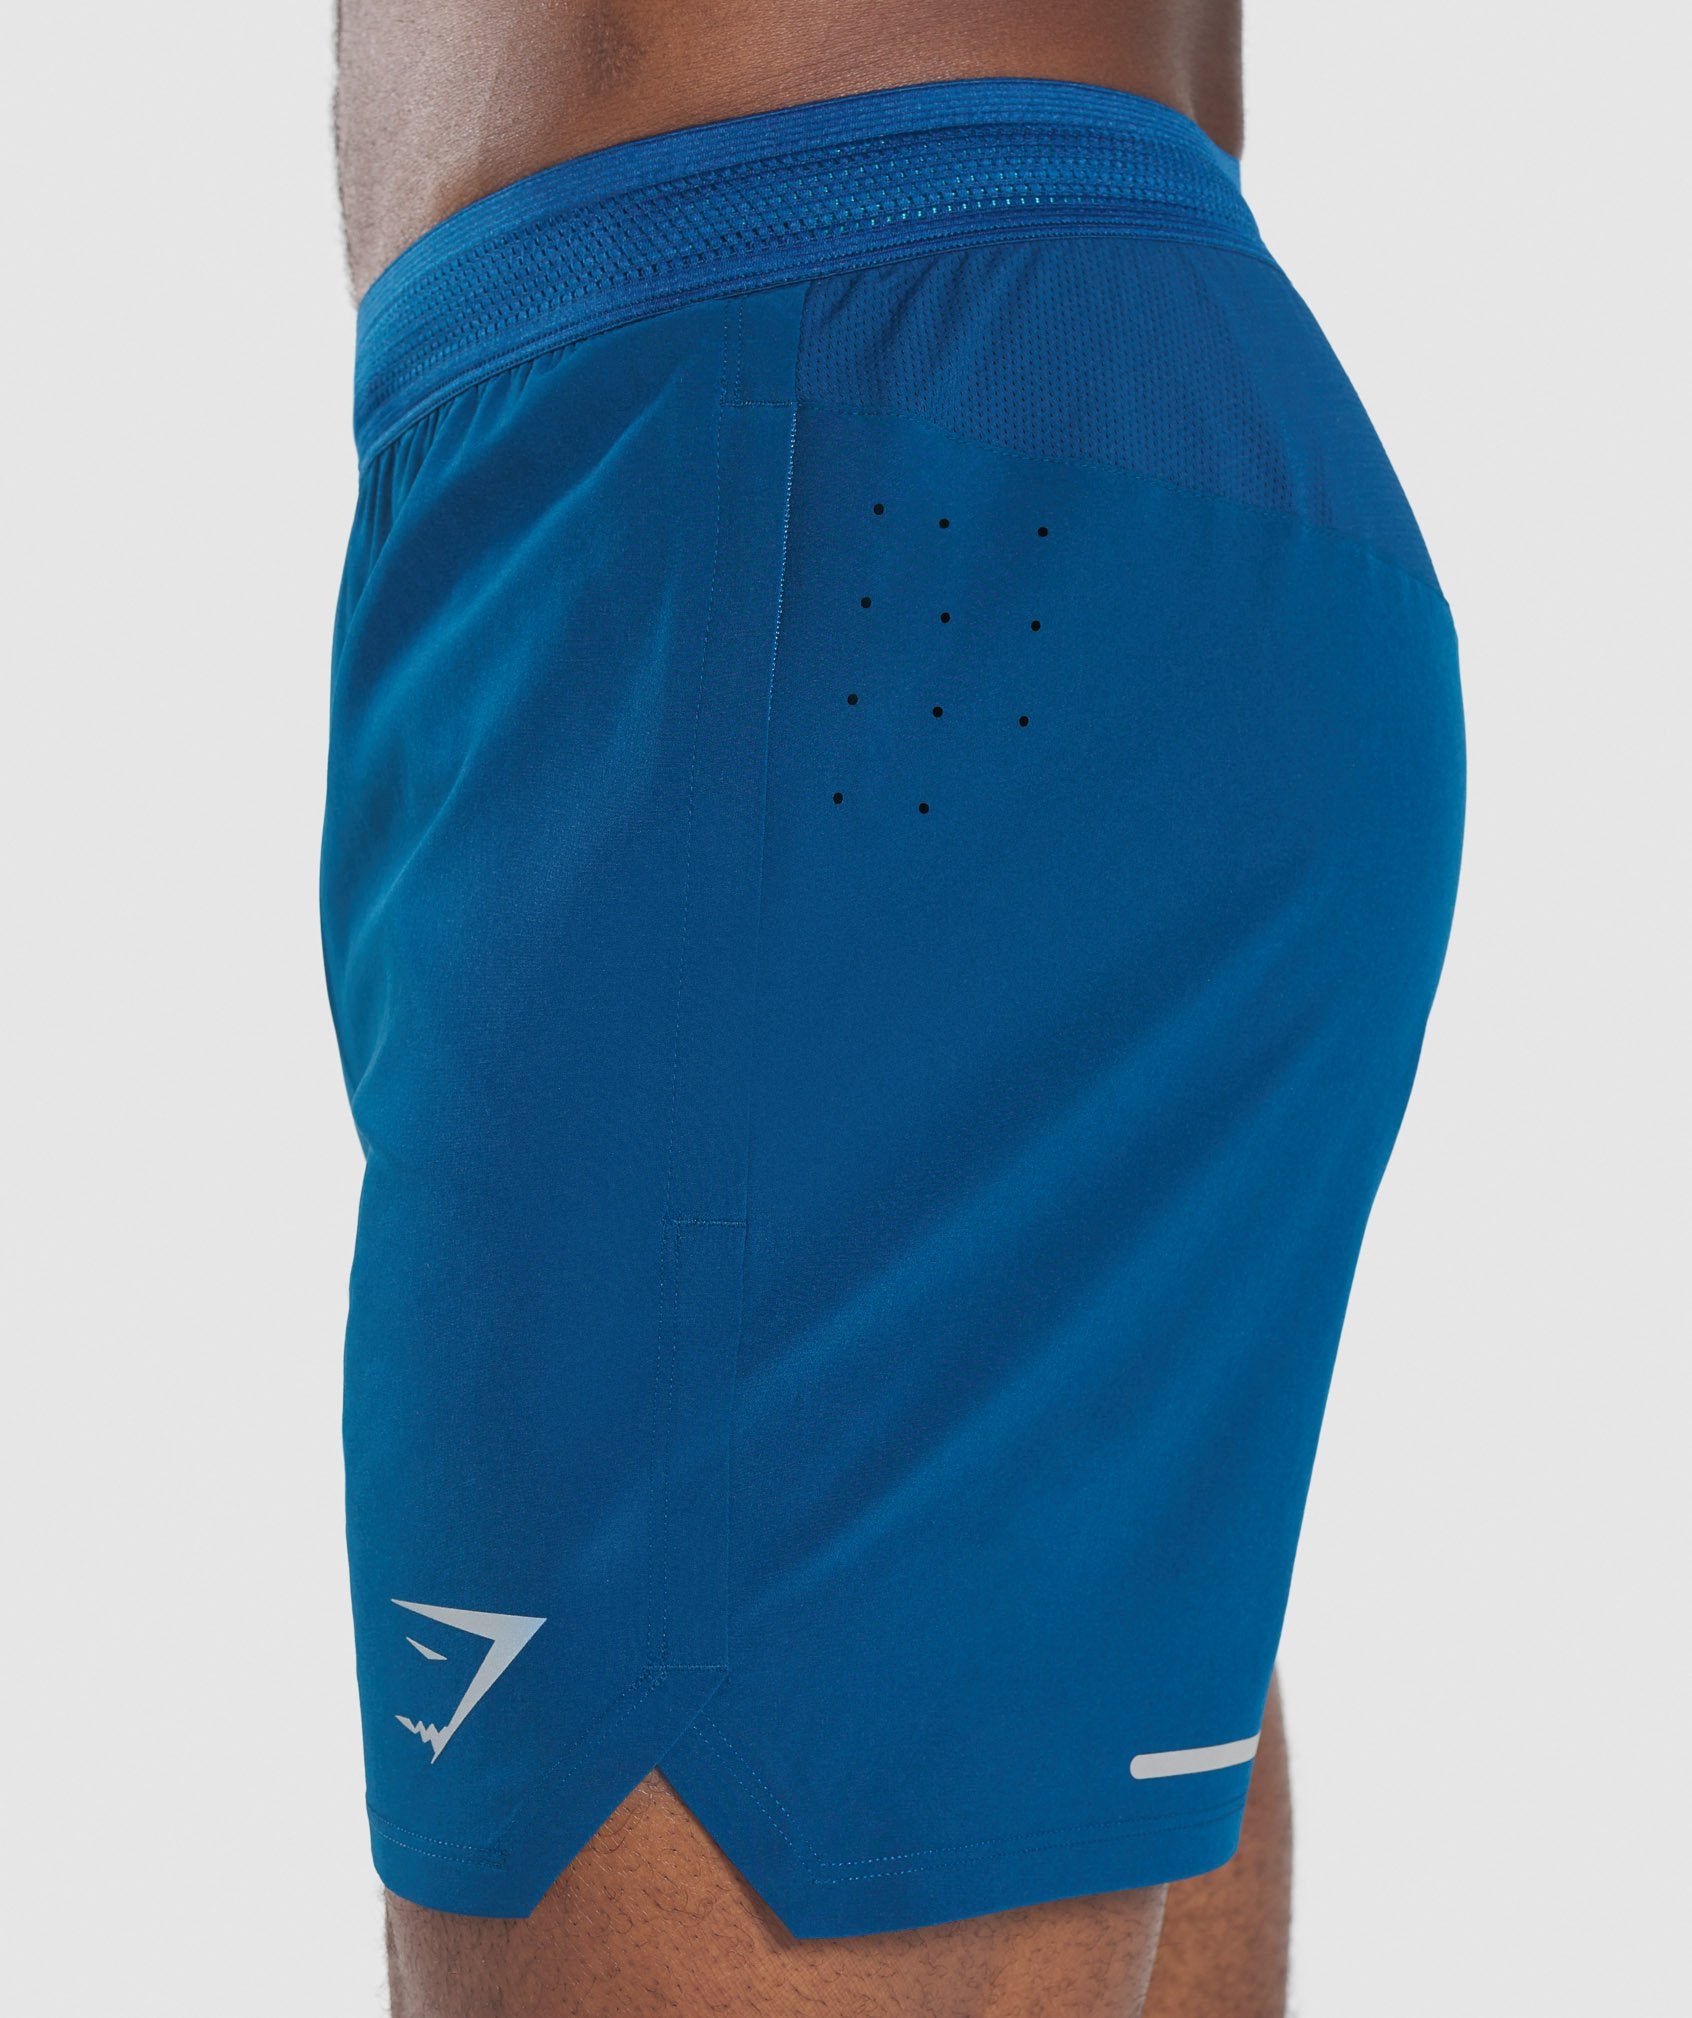 Speed 5" Shorts in Petrol Blue - view 6